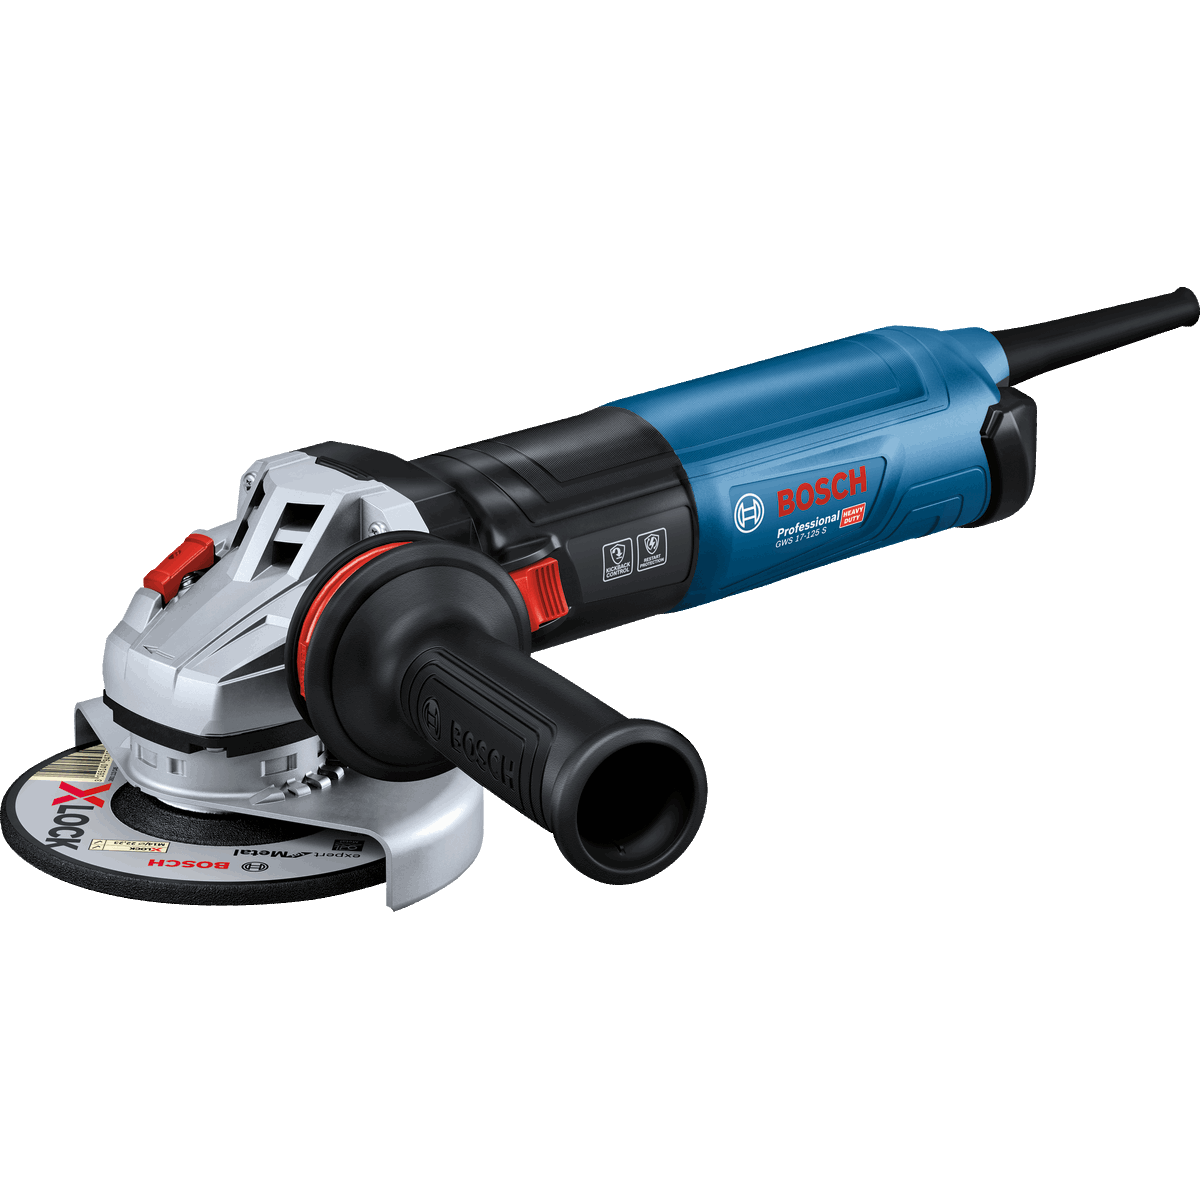 Bosch Professional Angle Grinder GWS 17-125 S 06017D0300 Power Tool Services